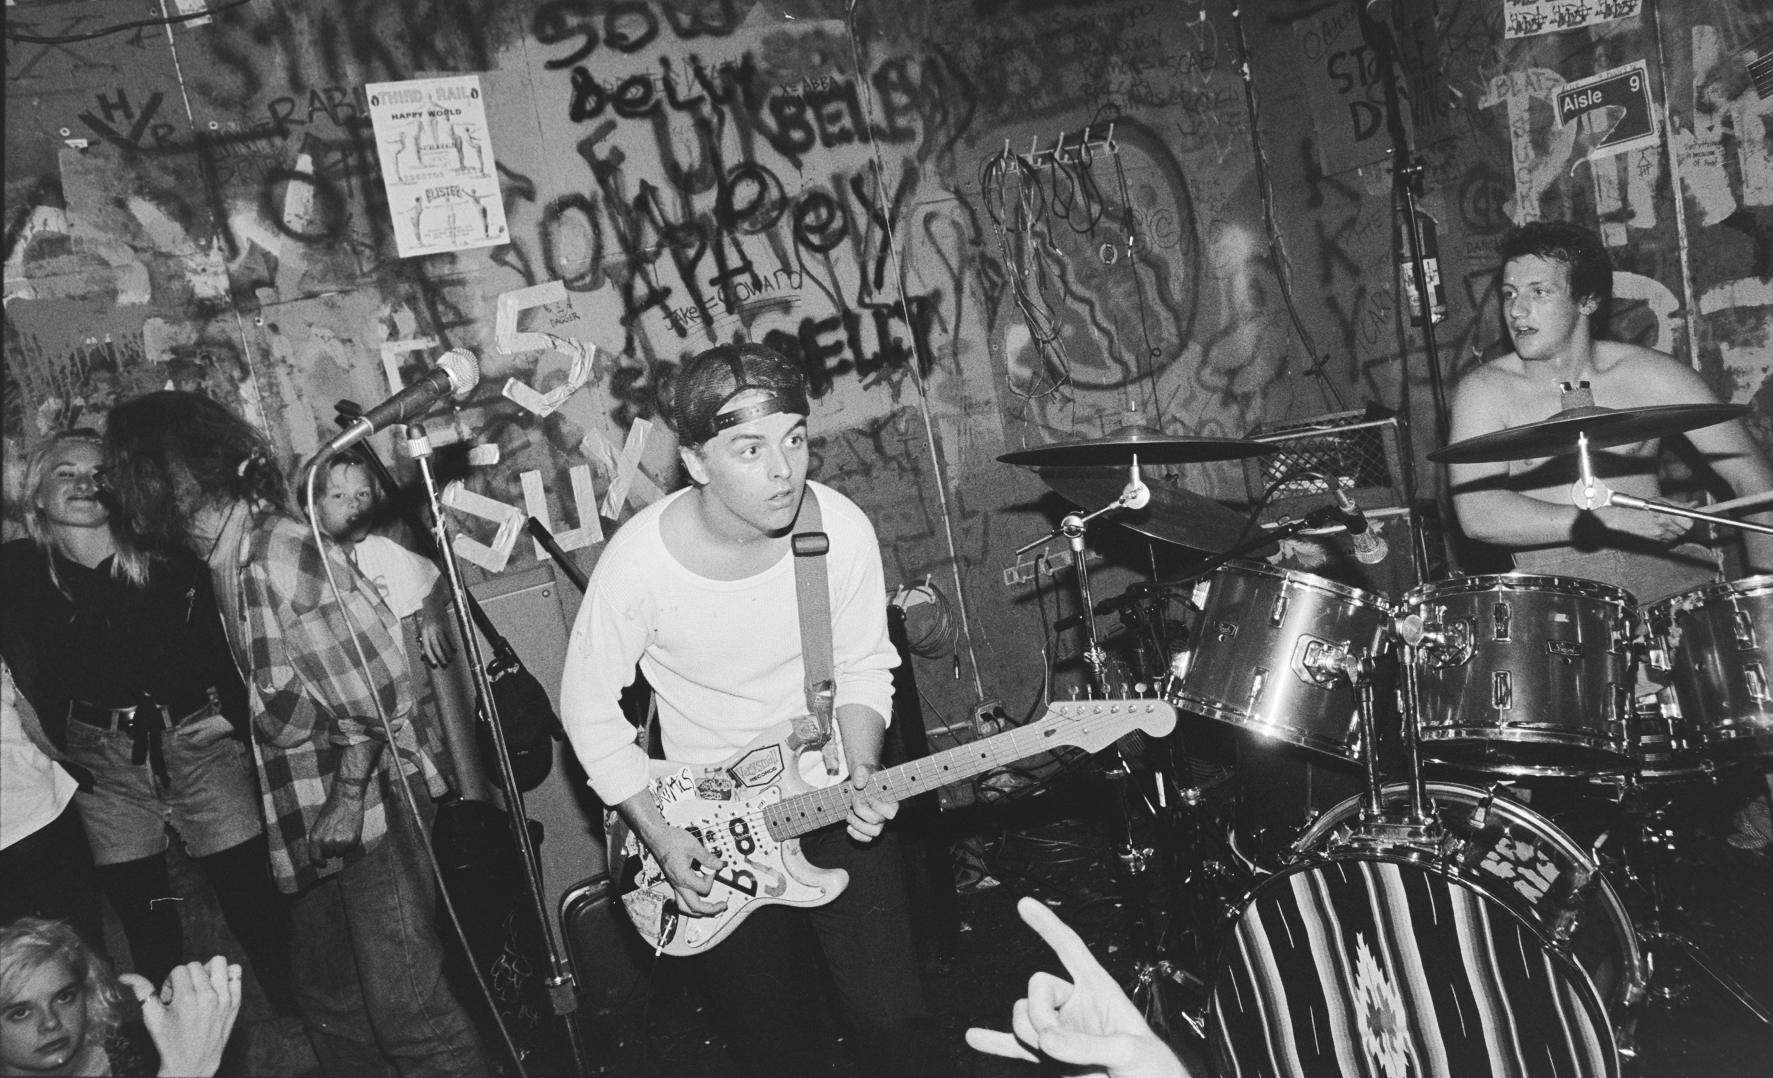 Green Day perform at 924 Gilman Street on Oct. 26, 1990 in Berkeley, Calif.